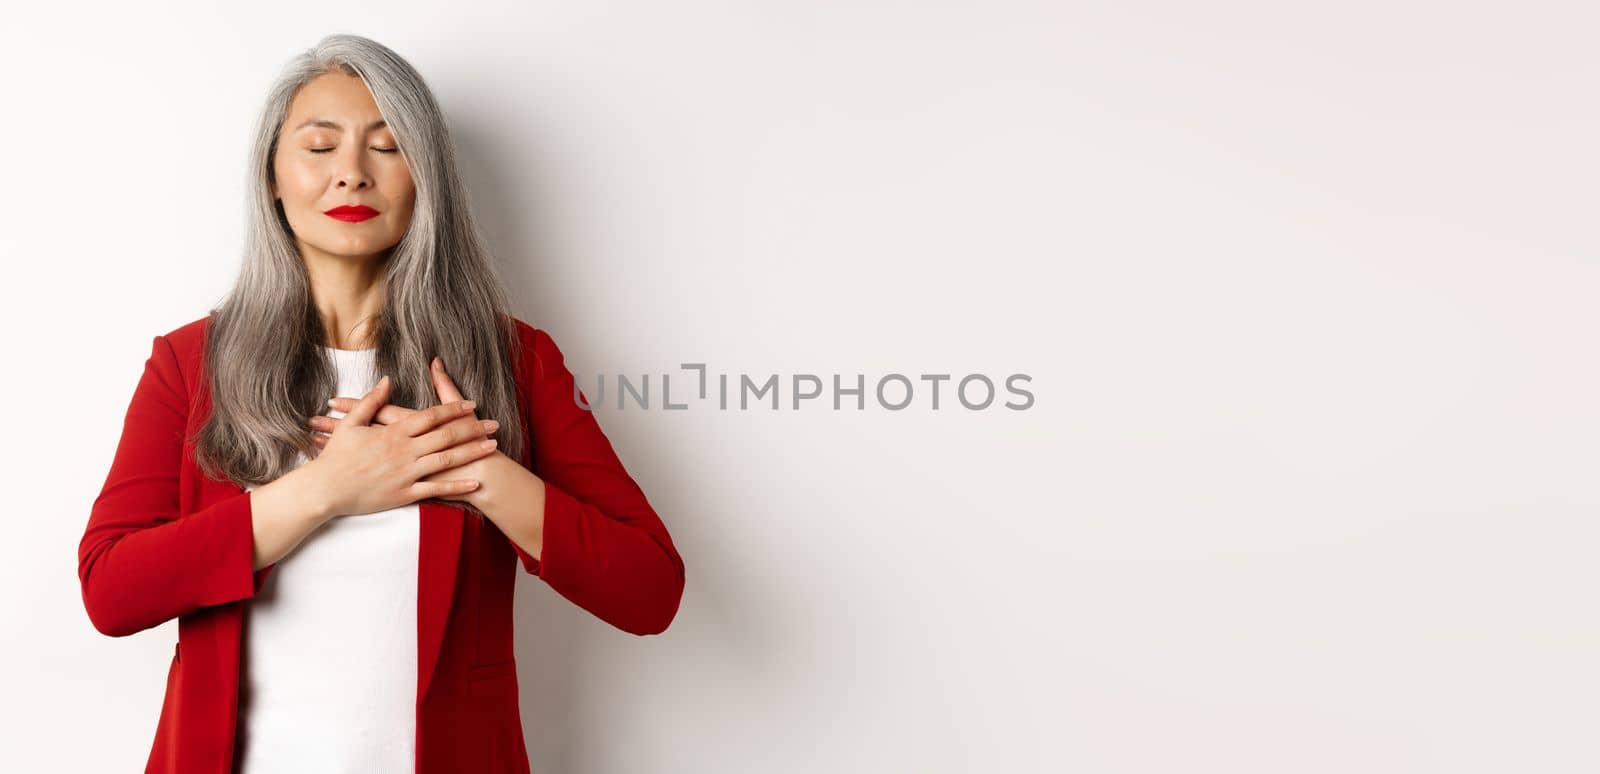 Senior asian woman with red lips and blazer, close eyes and holding hands on heart thankful, feeling nostalgic, dreaming of something, standing over white background.